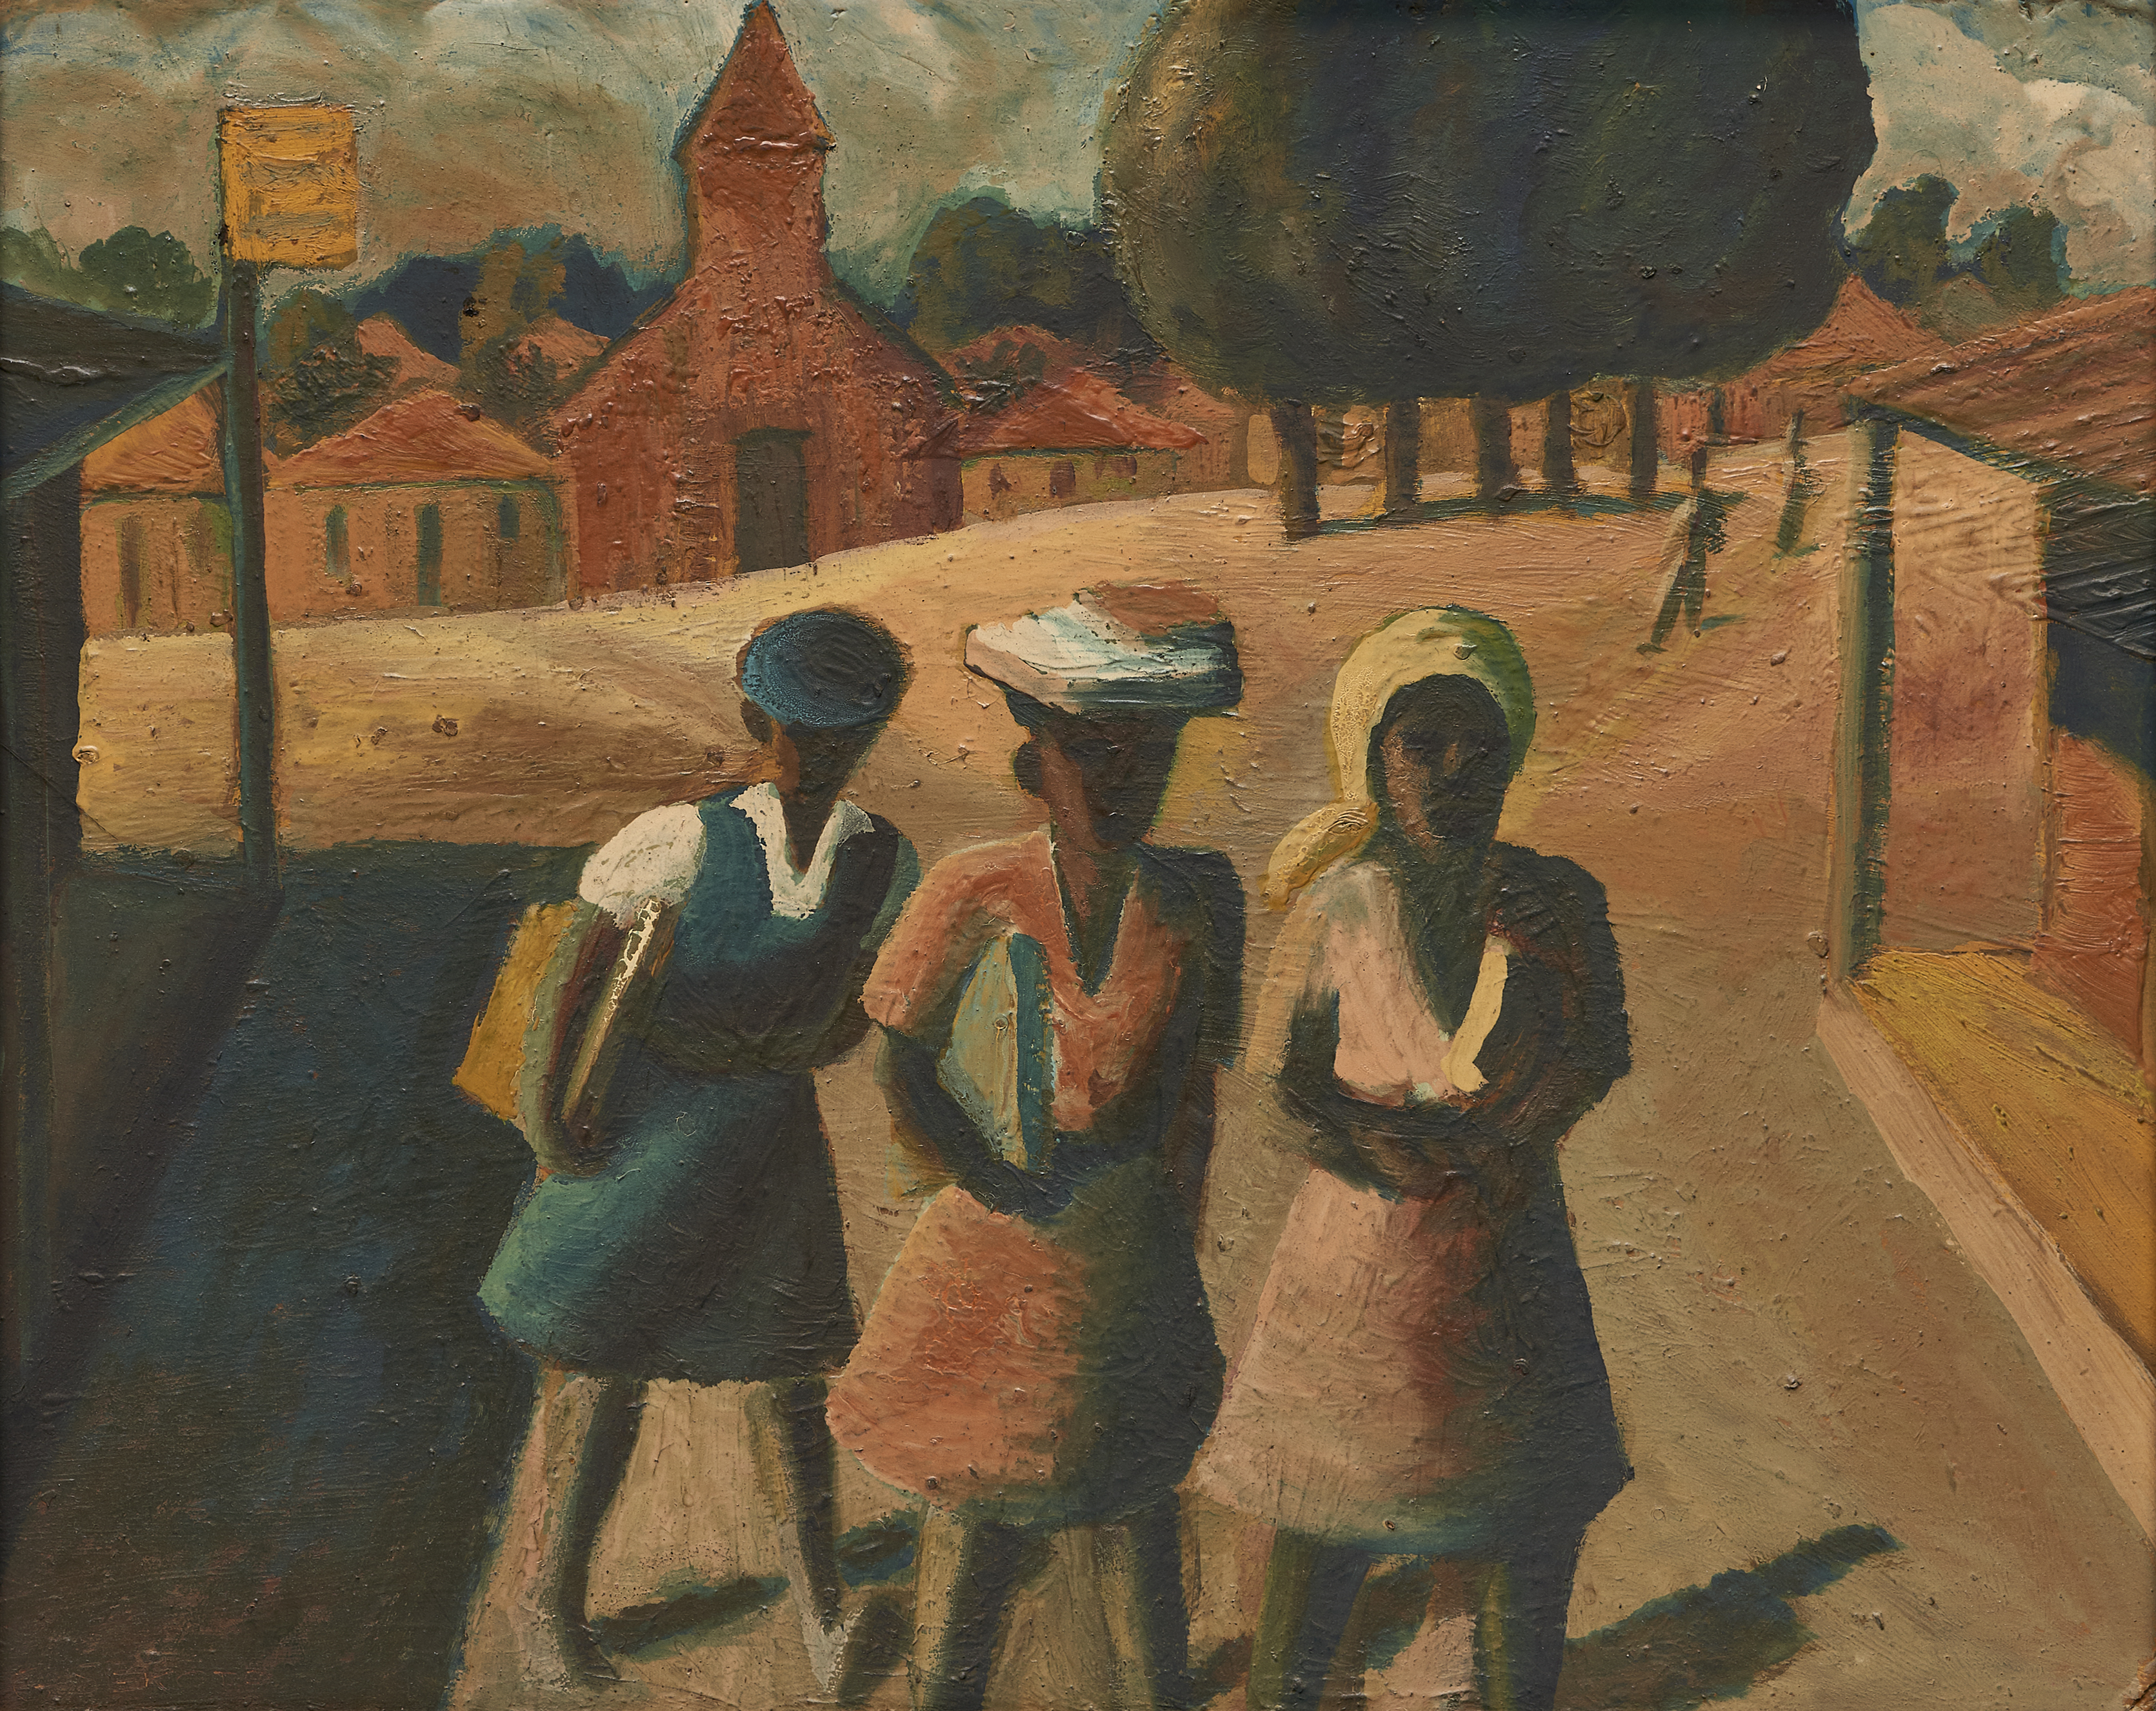 Three School Girls, an oil on board painted by South African artist Gerard Sekoto sometime between 1940 and 1947. 